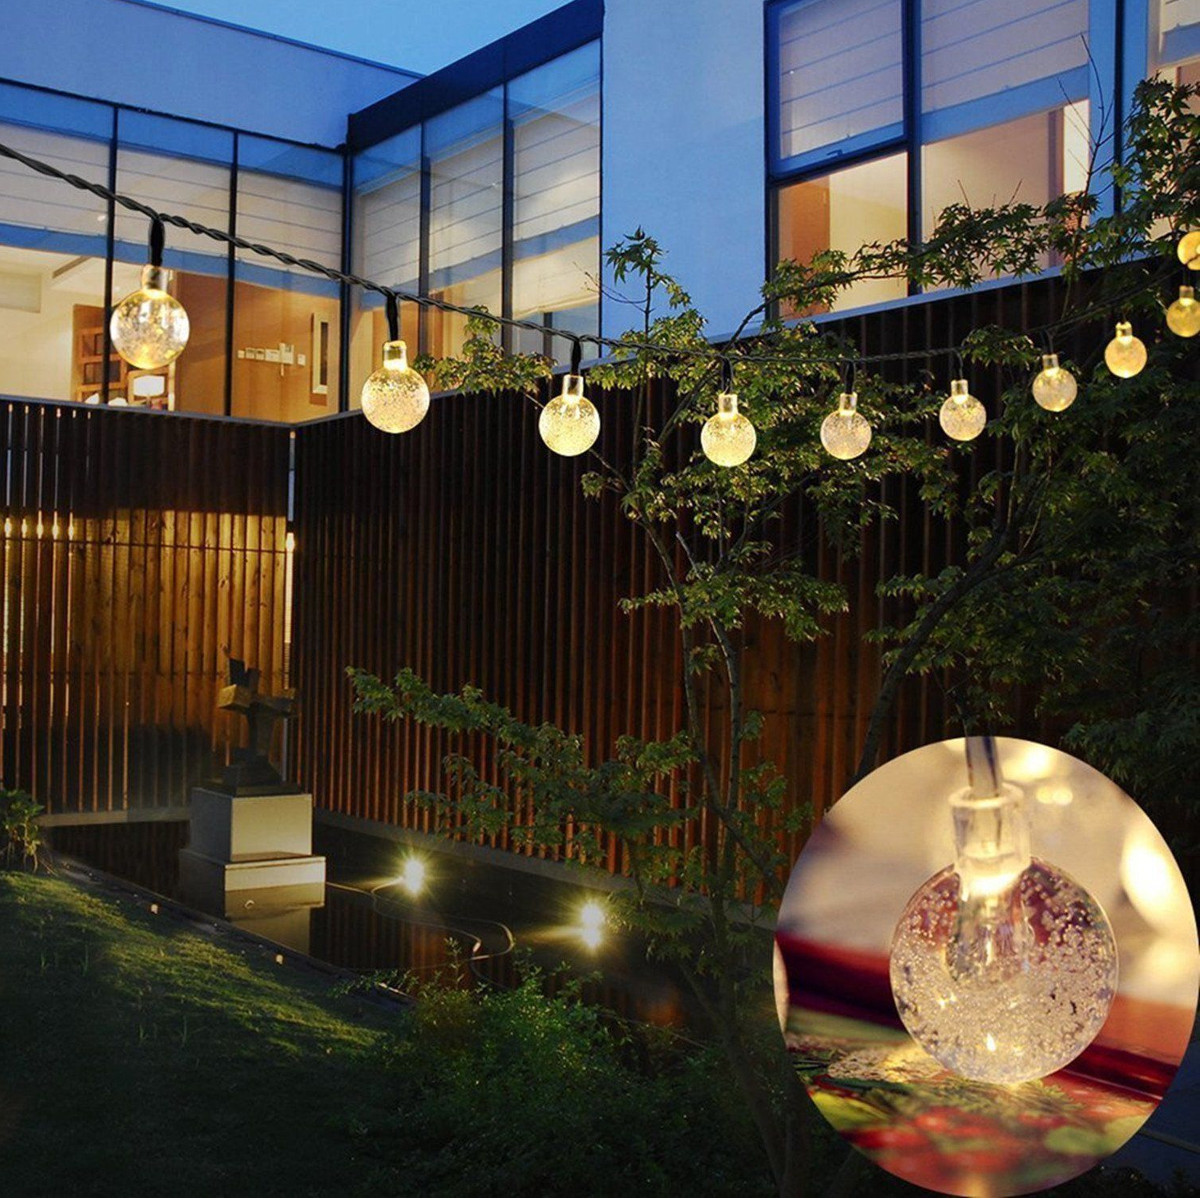 21ft-Solar-Powered-String-Lights-30-Crystal-Balls-Outdoor-Home-LED-Fairy-Lights-Decorations-1605227-4